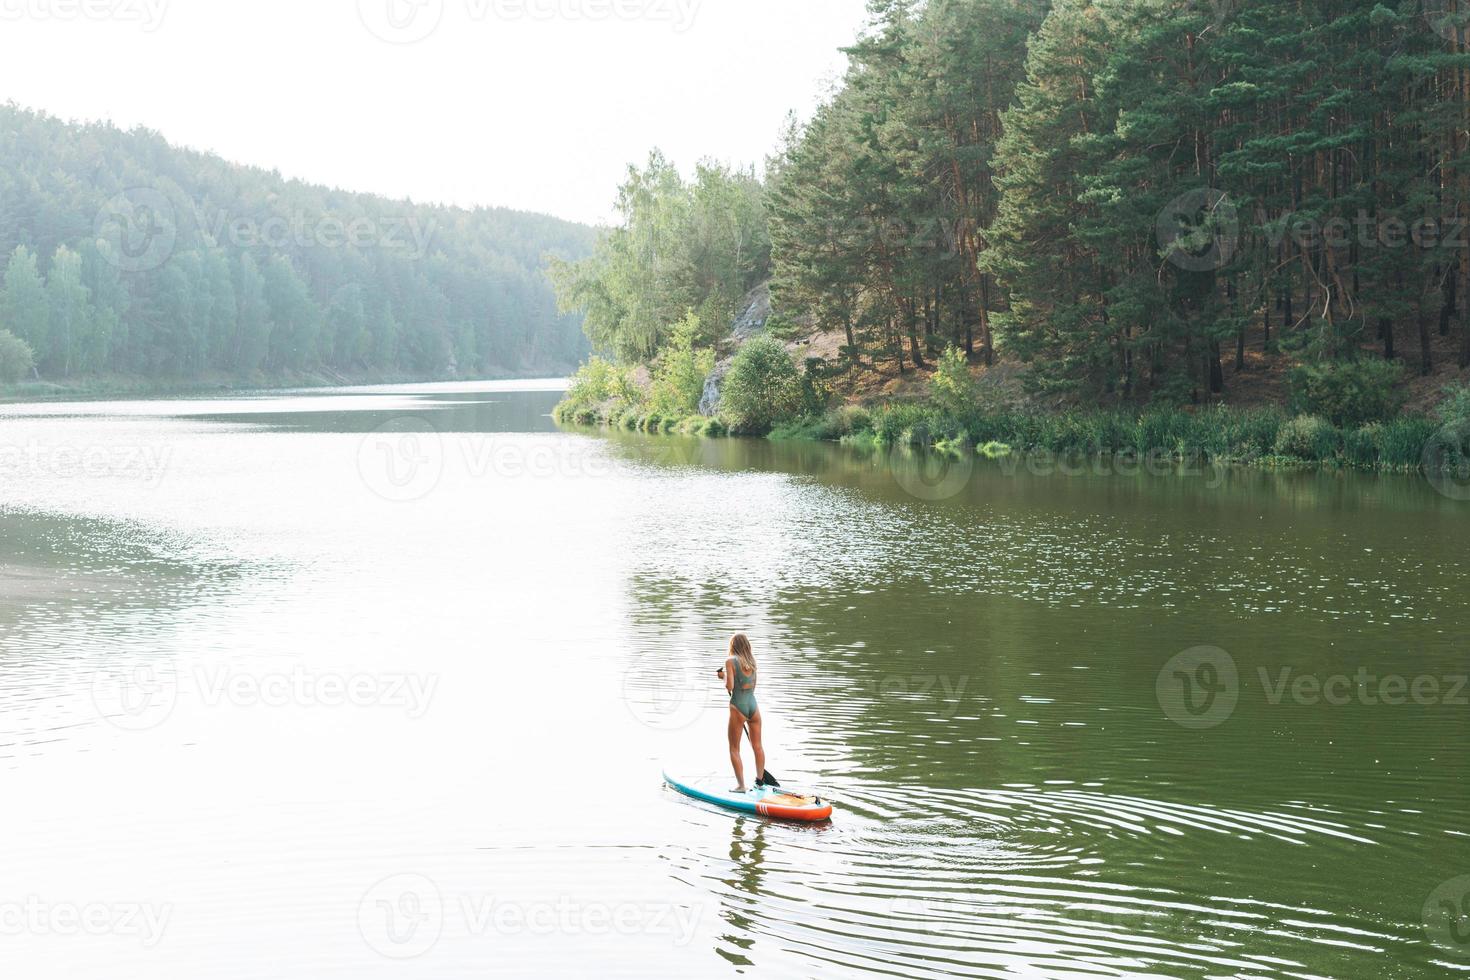 The slim young woman in green sweemsuit on sup boat with oar floating on river, weekend trip and local travel photo